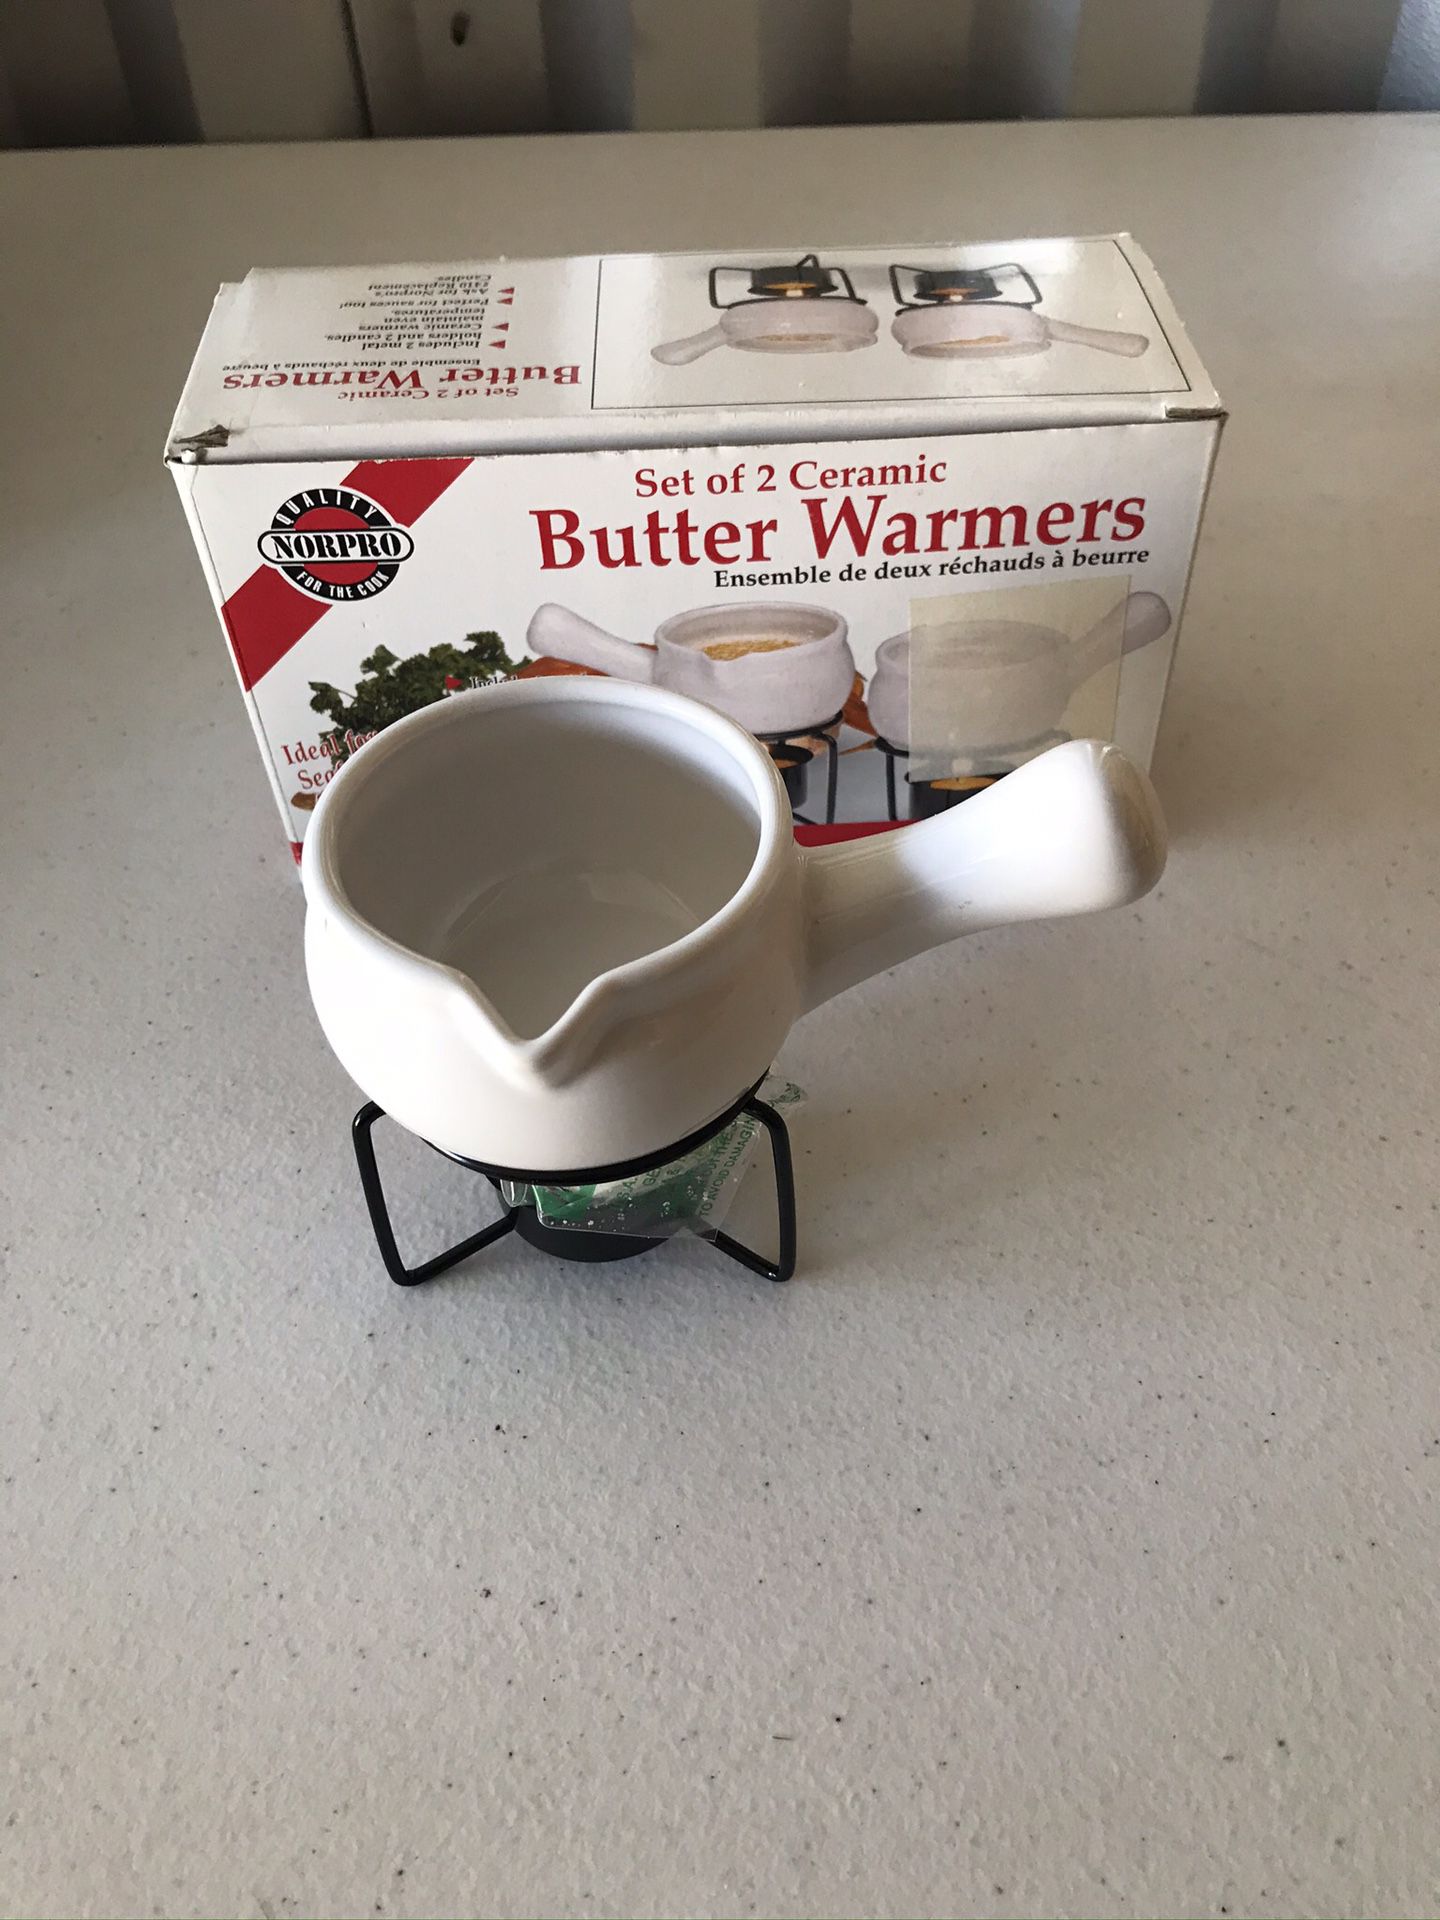 2 sets of 2 Ceramic Butter Warmers (4 total warmers) with Stand and candles